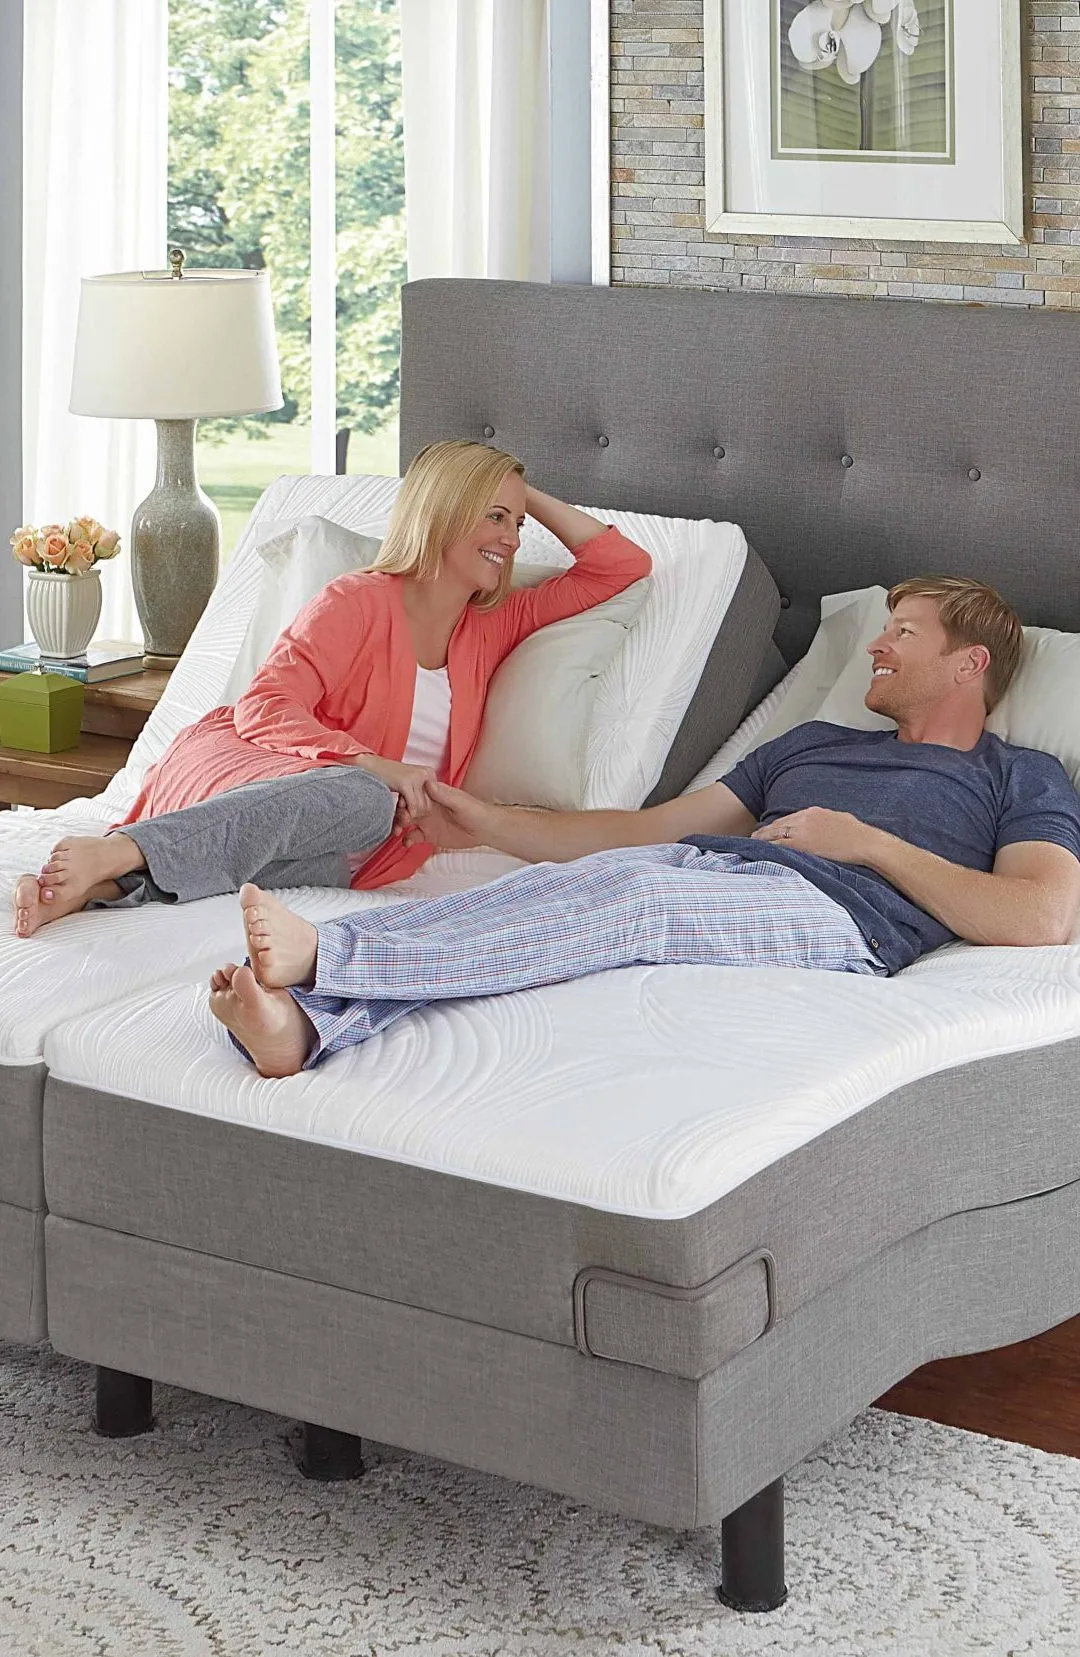 The DOs and DON’Ts of Buying an Adjustable Bed